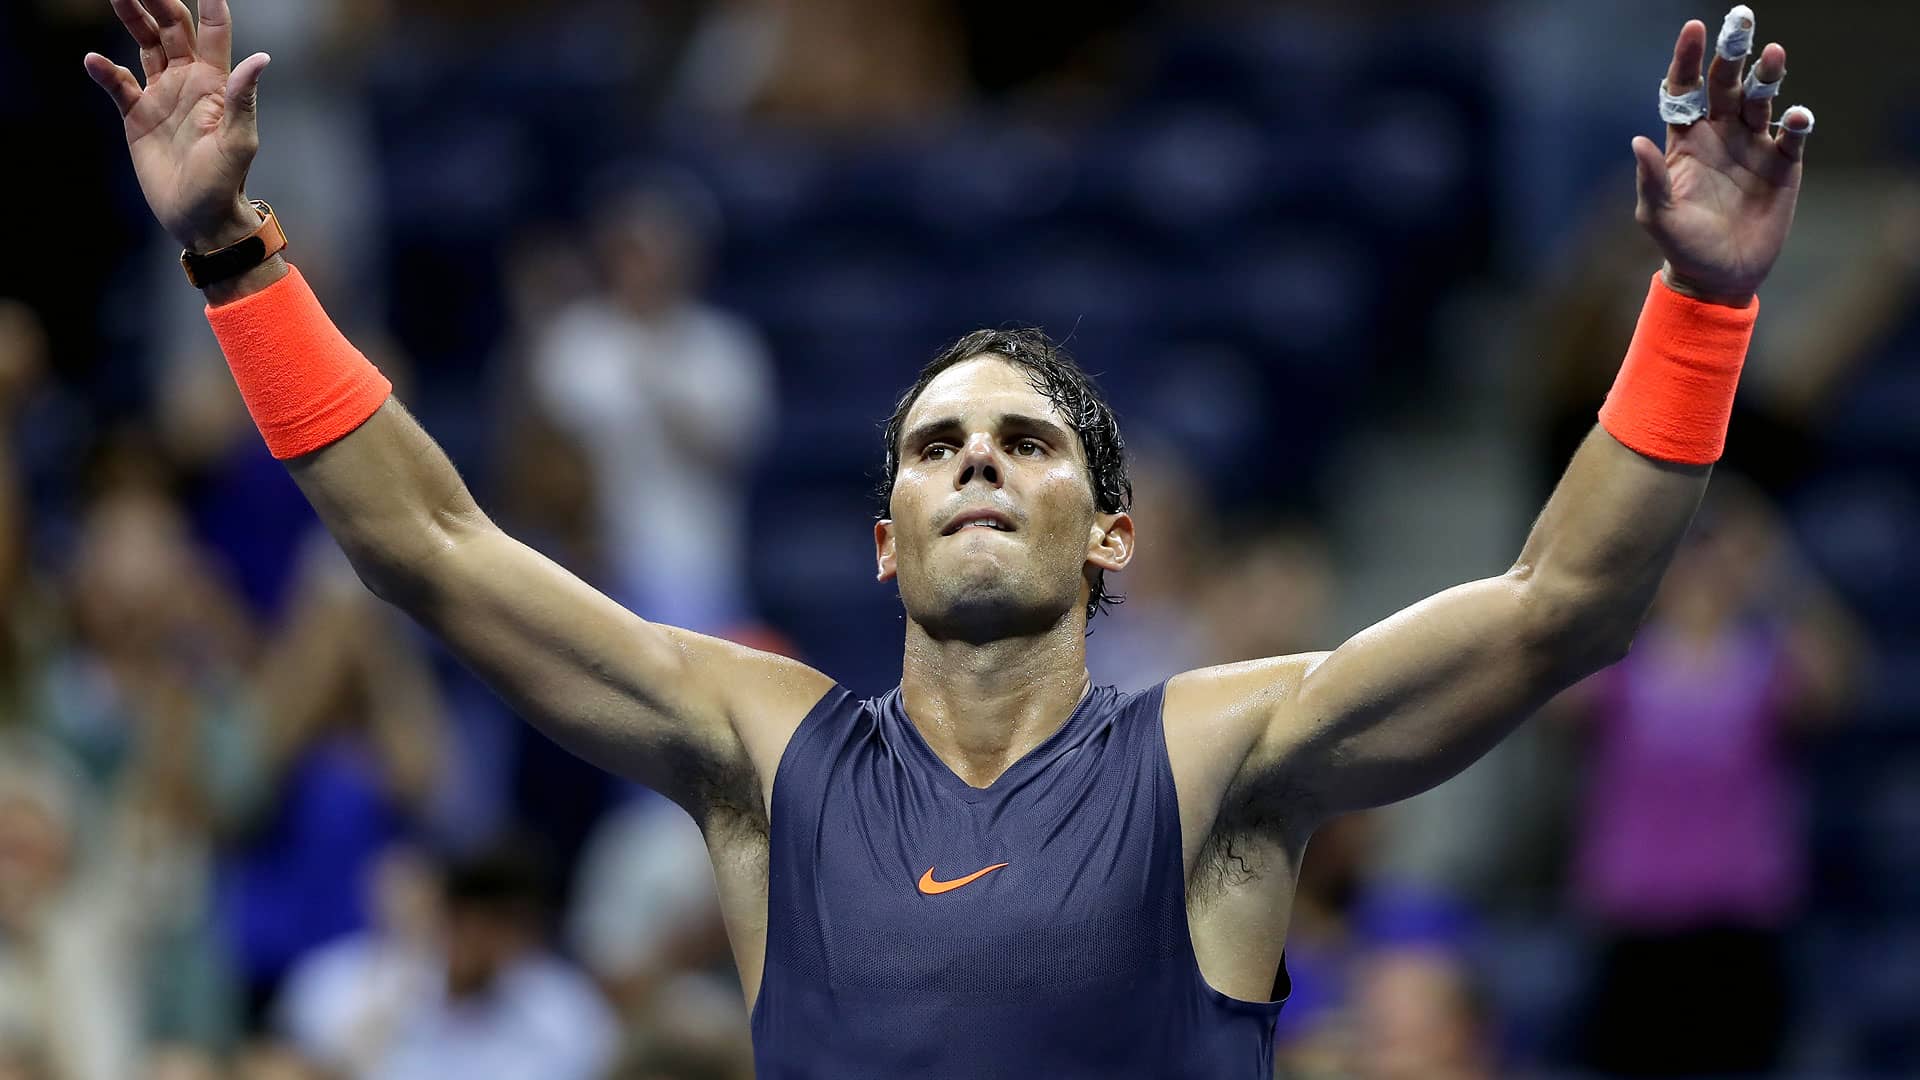 World No. 1 and three-time champion Rafael Nadal celebrates beating Dominic Thiem after their epic five-set US Open quarter-final win.